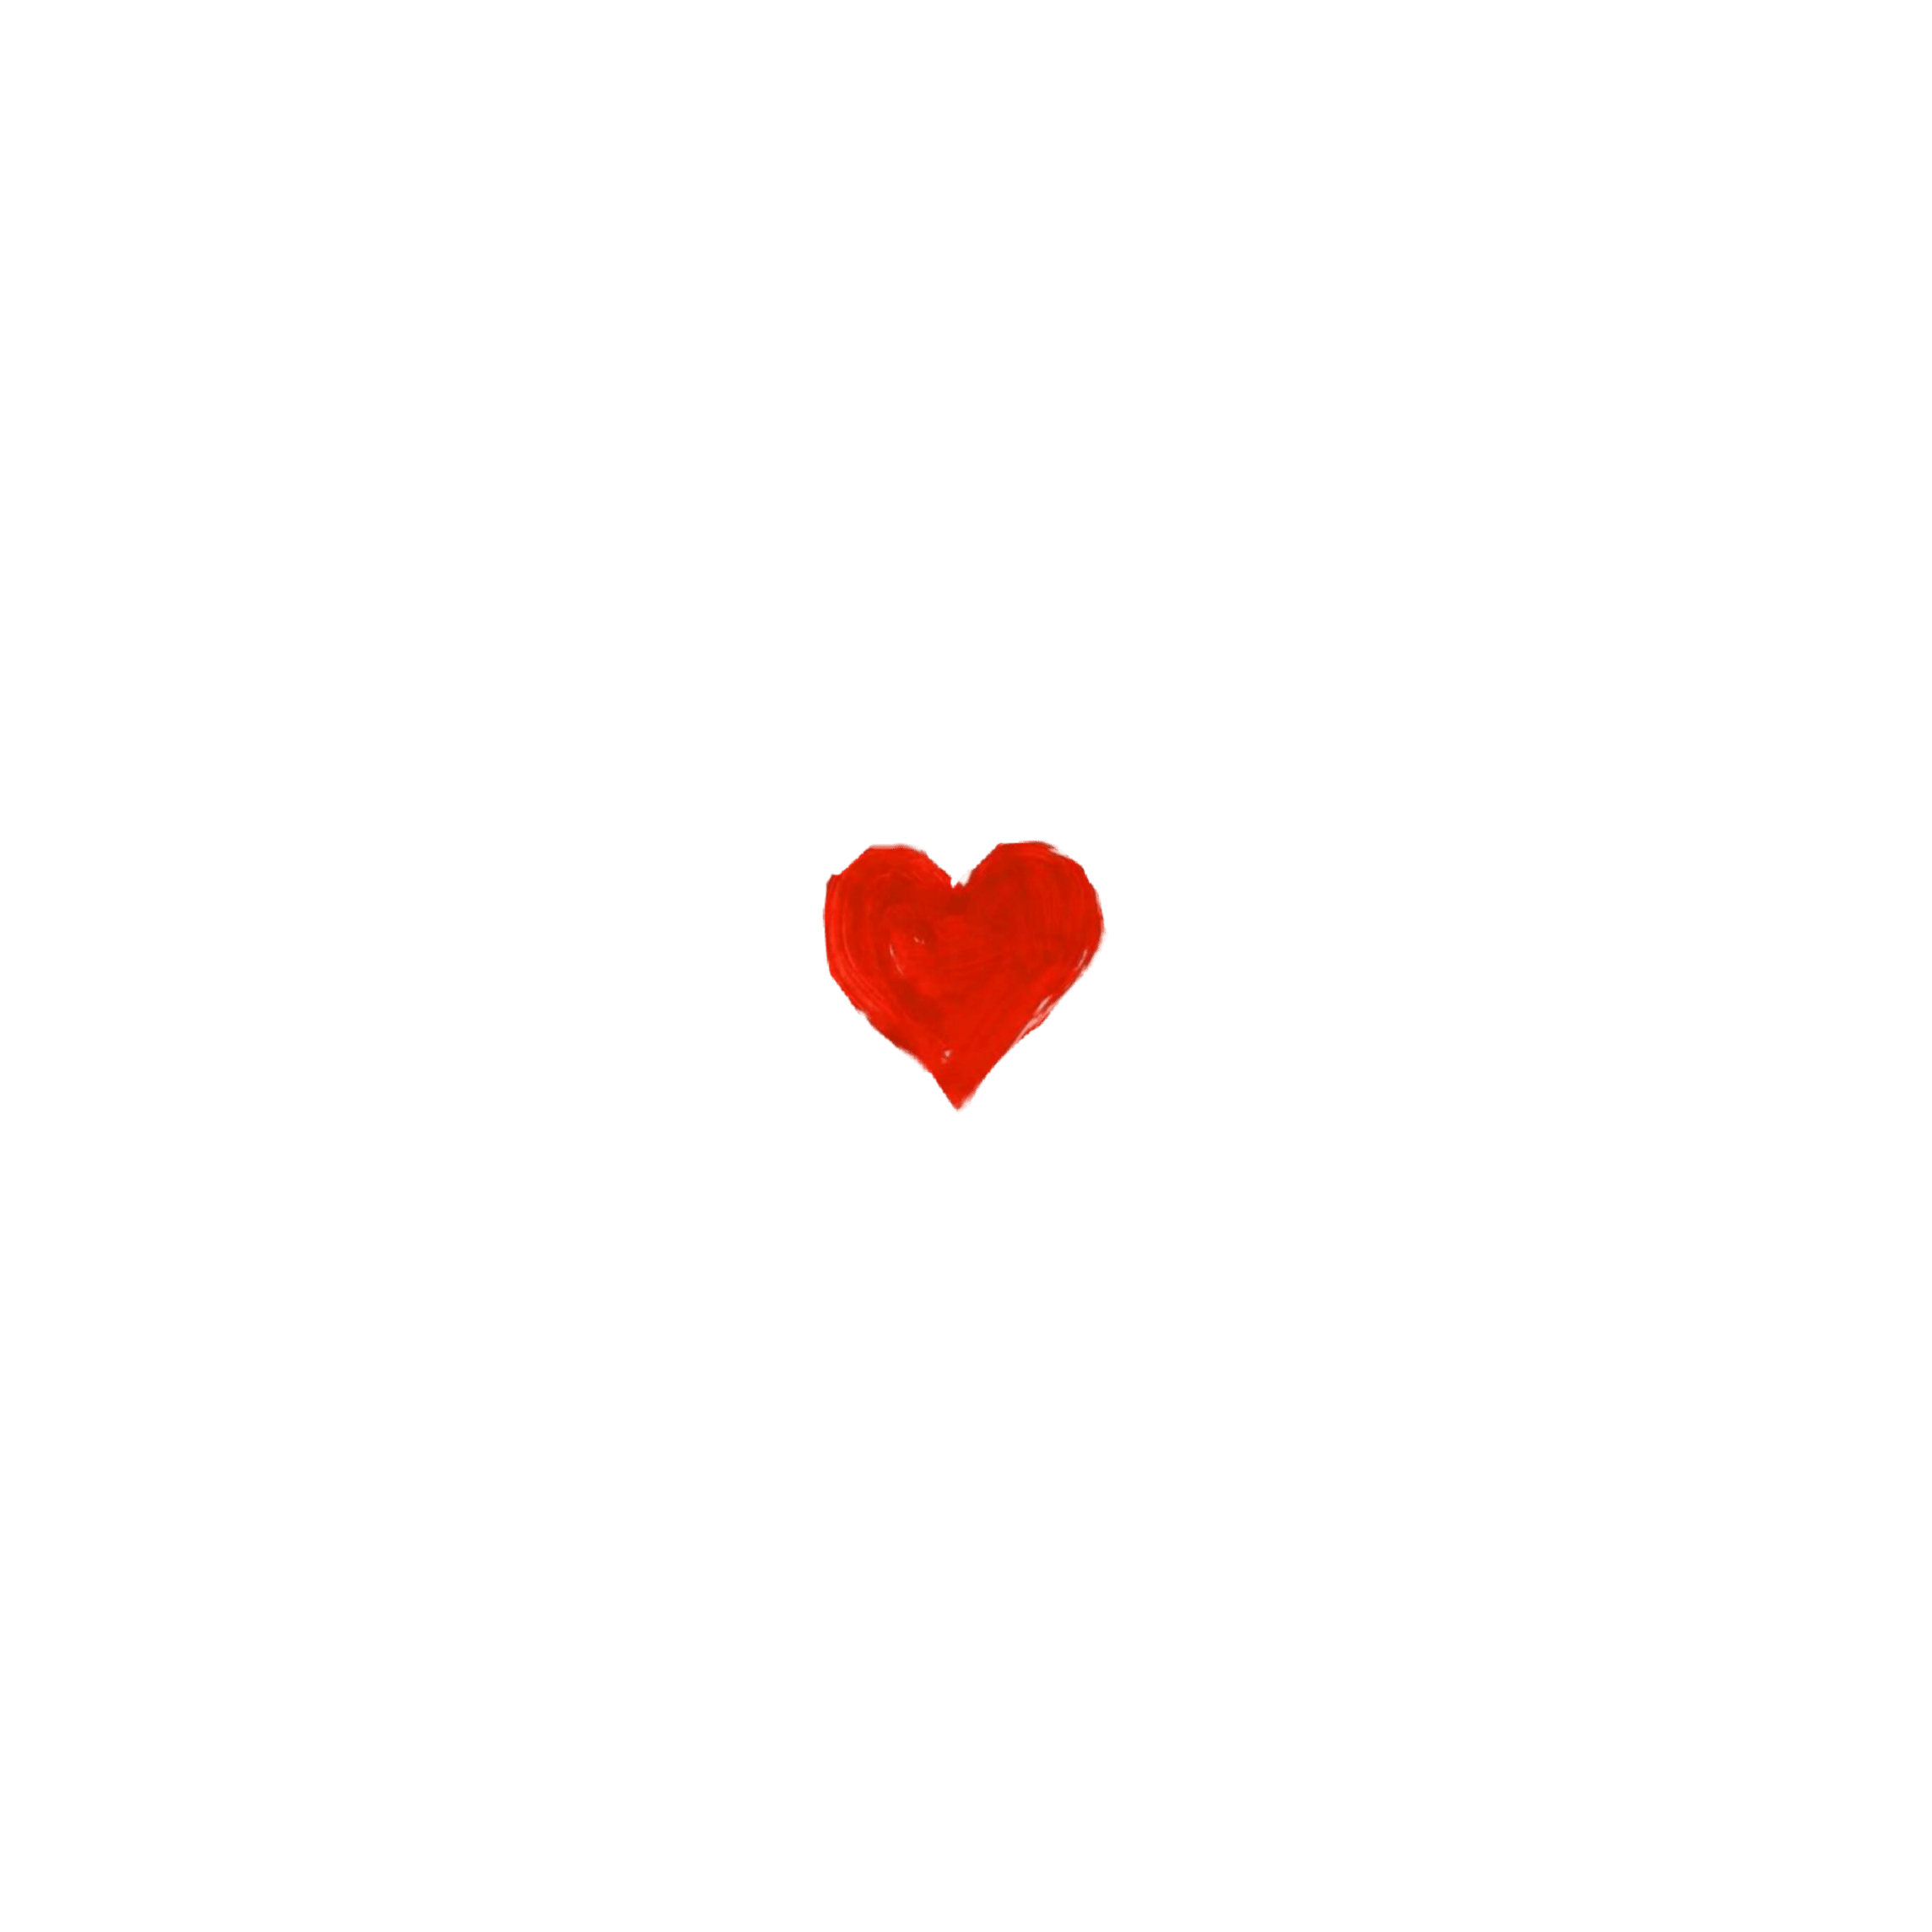 A red heart is shown on the black background - Heart